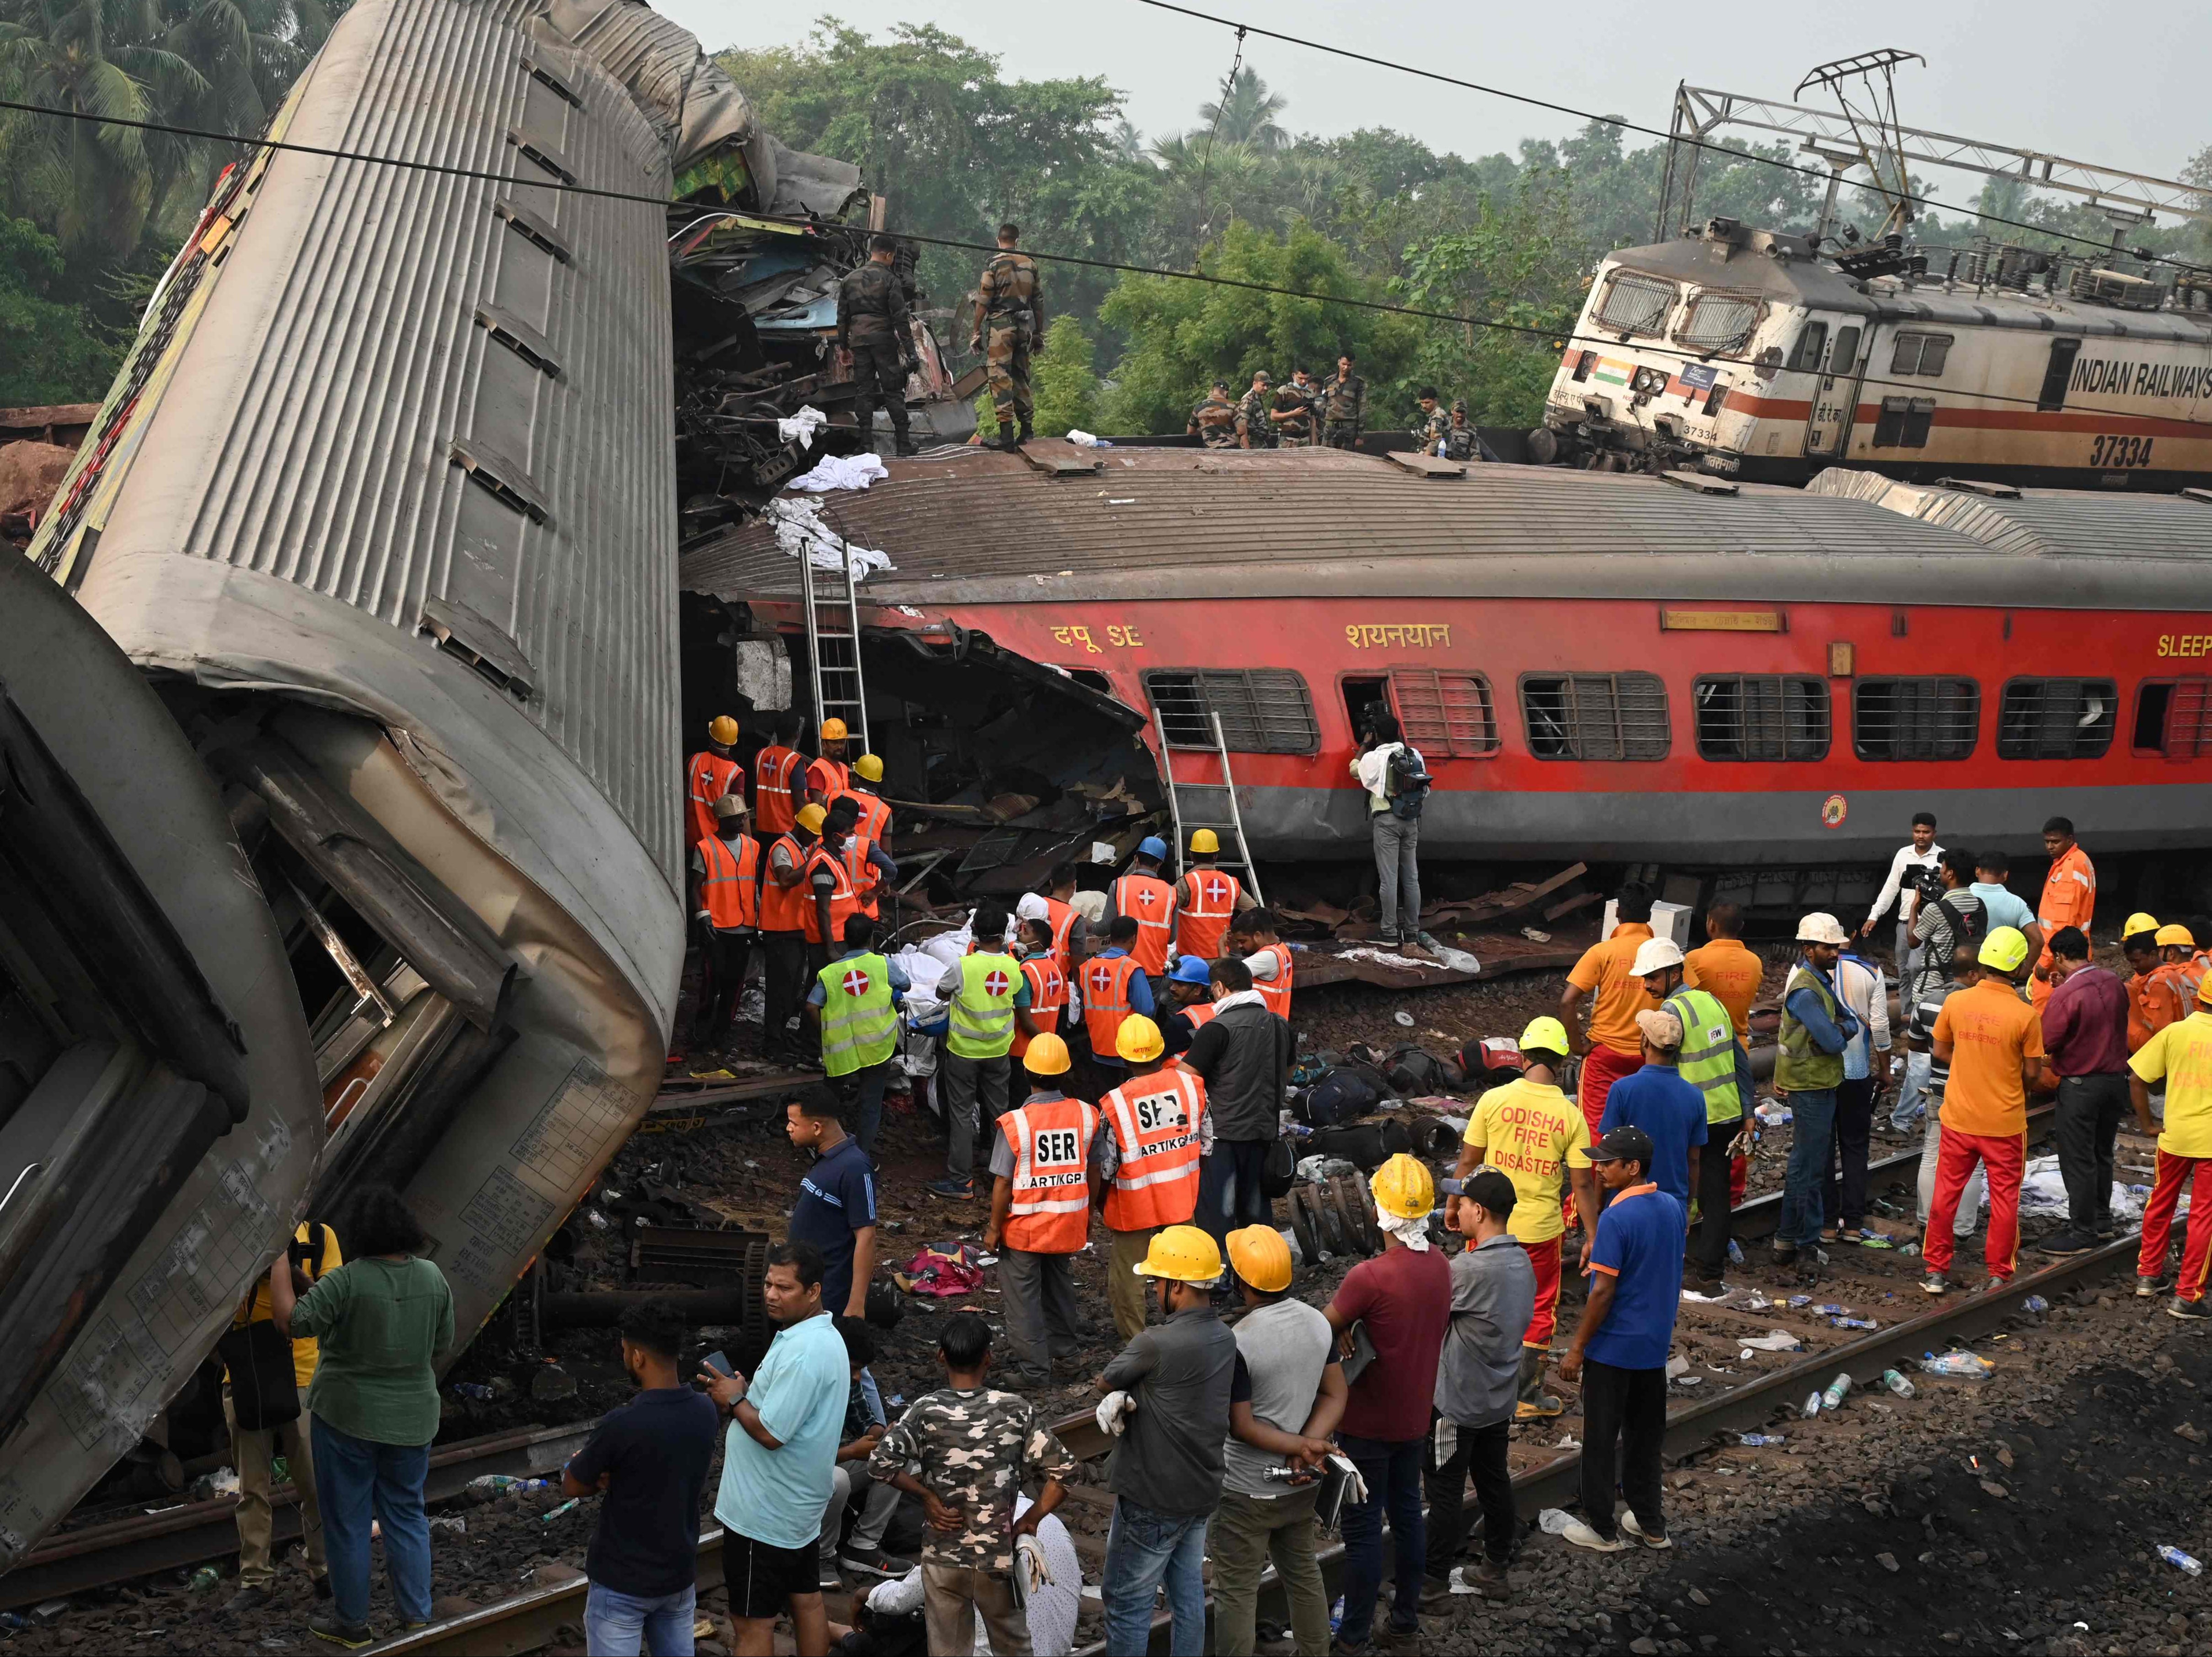 Rescue workers gather around damaged carriages at the accident site of a three-train collision near Balasore